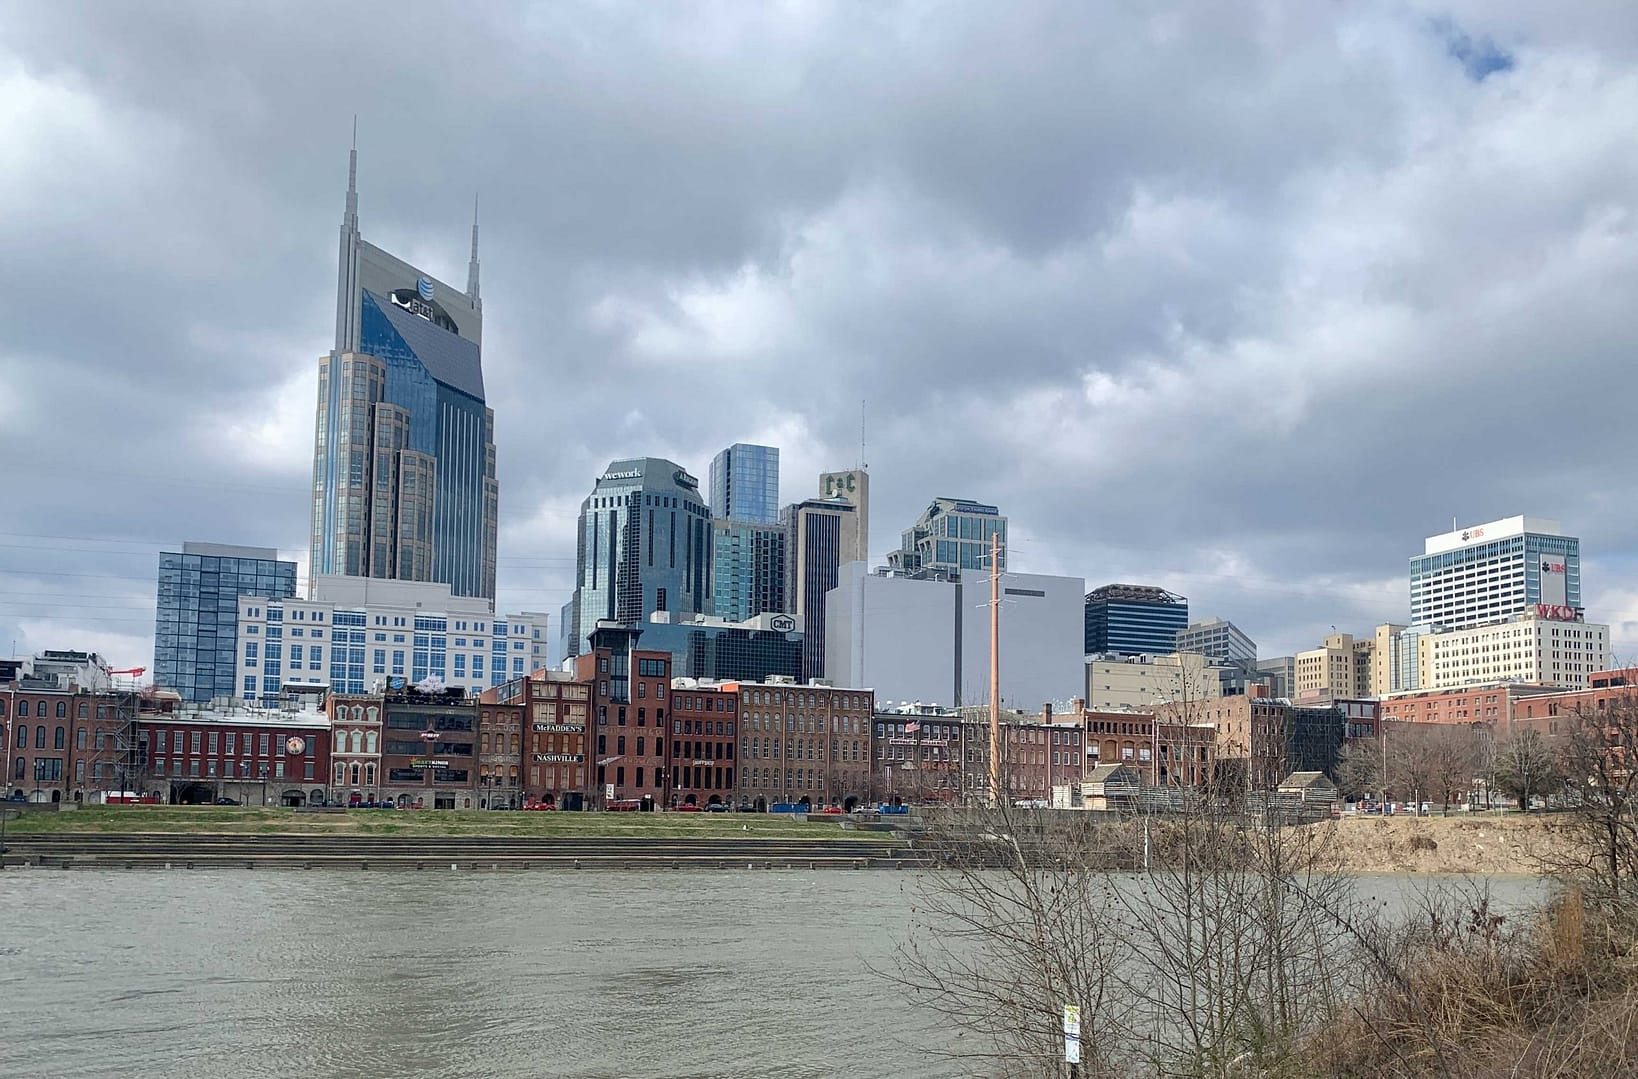 There’s more to Nashville than just music. Check out these 10 amazing experiences